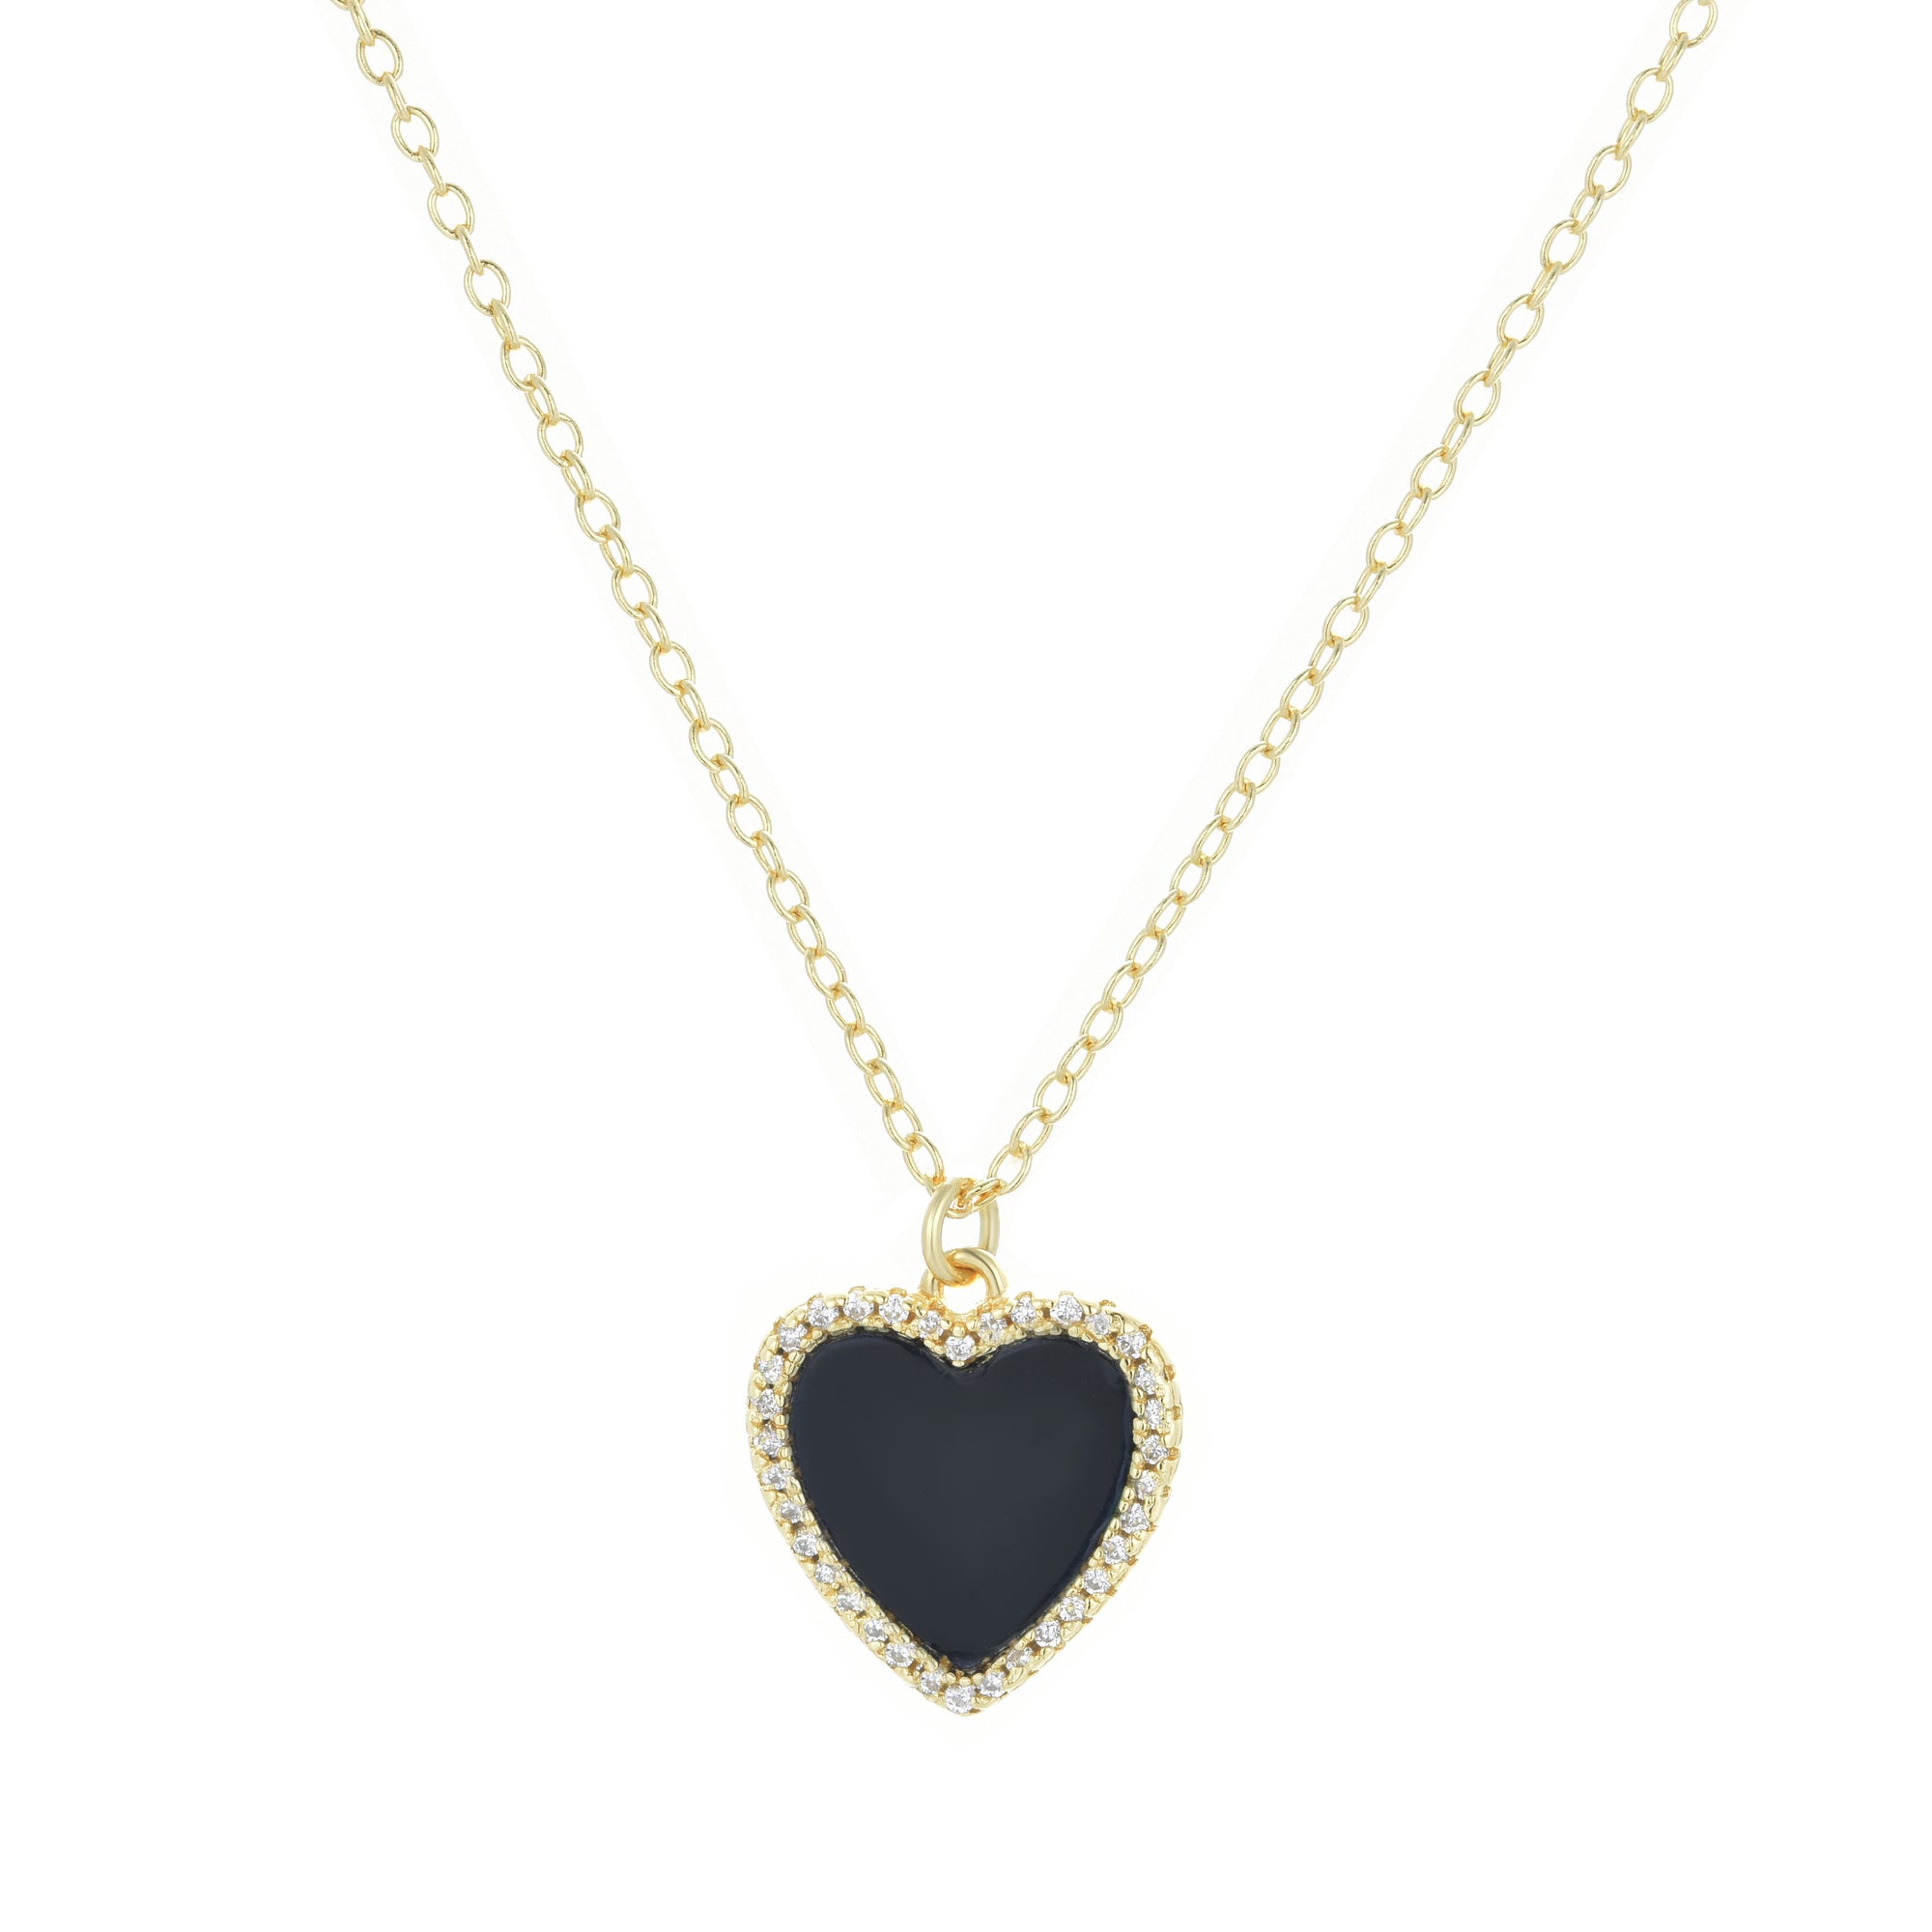 Black onyx heart necklace with crystals gold